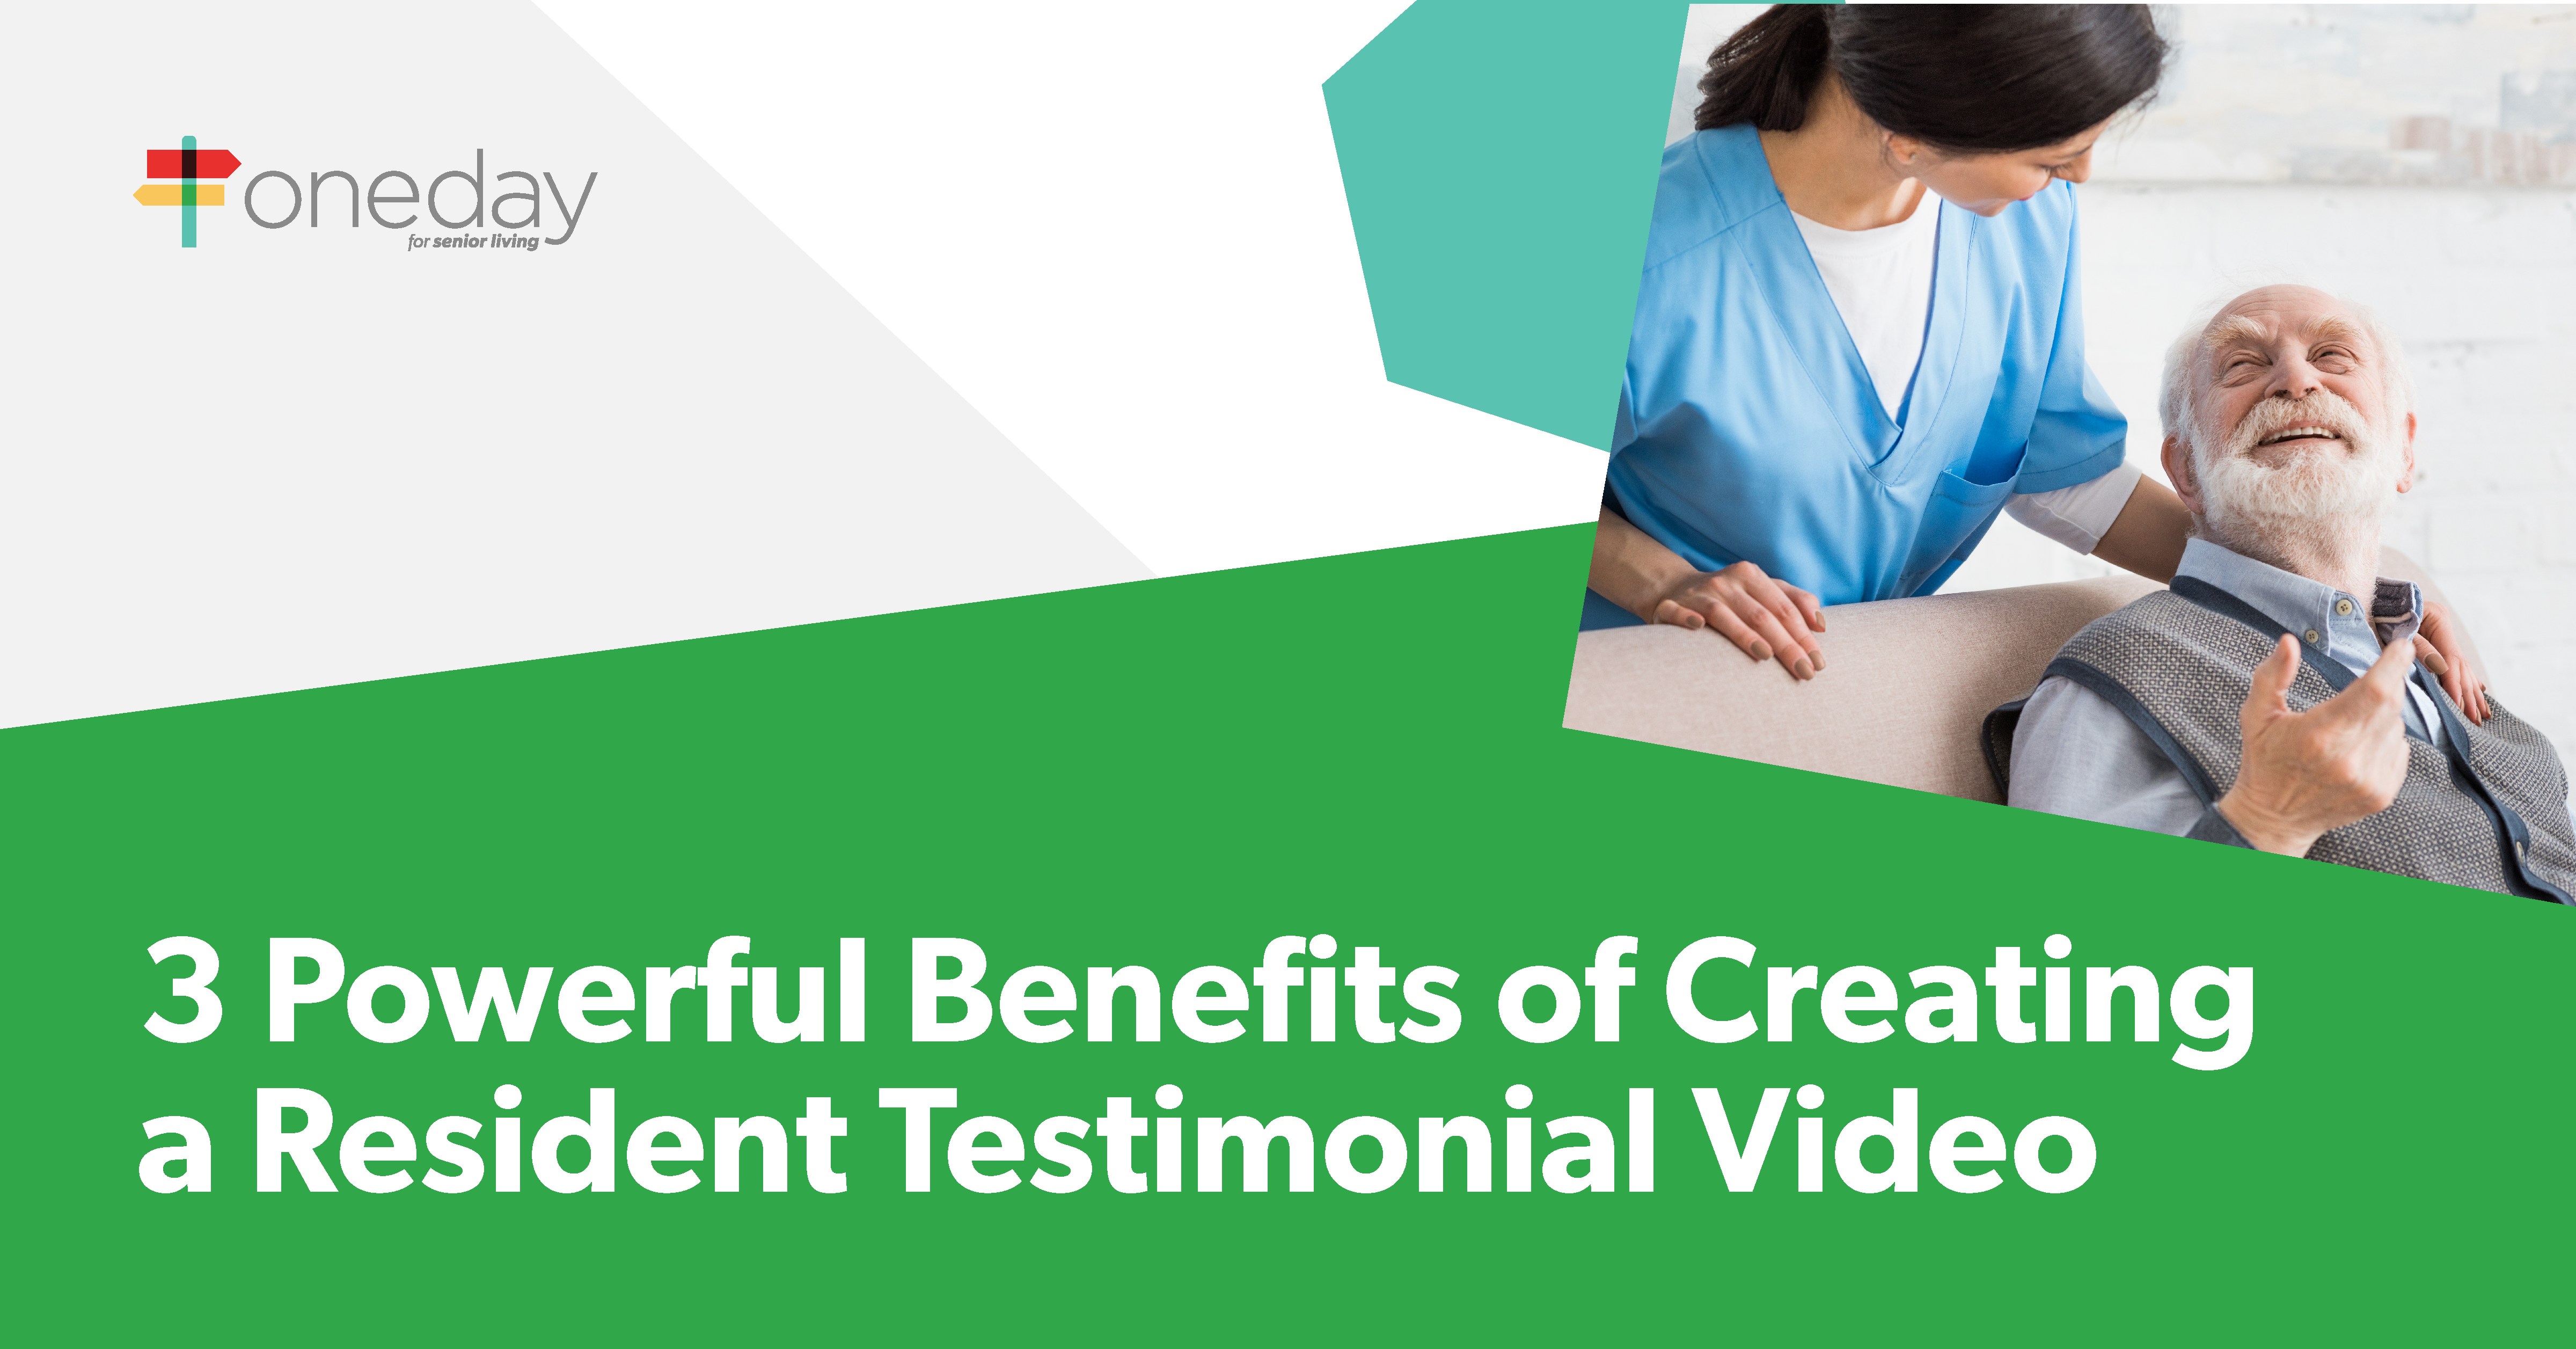 Insights and tips on using resident testimonial videos in your senior living marketing strategy to build trust and engage with prospects and families.